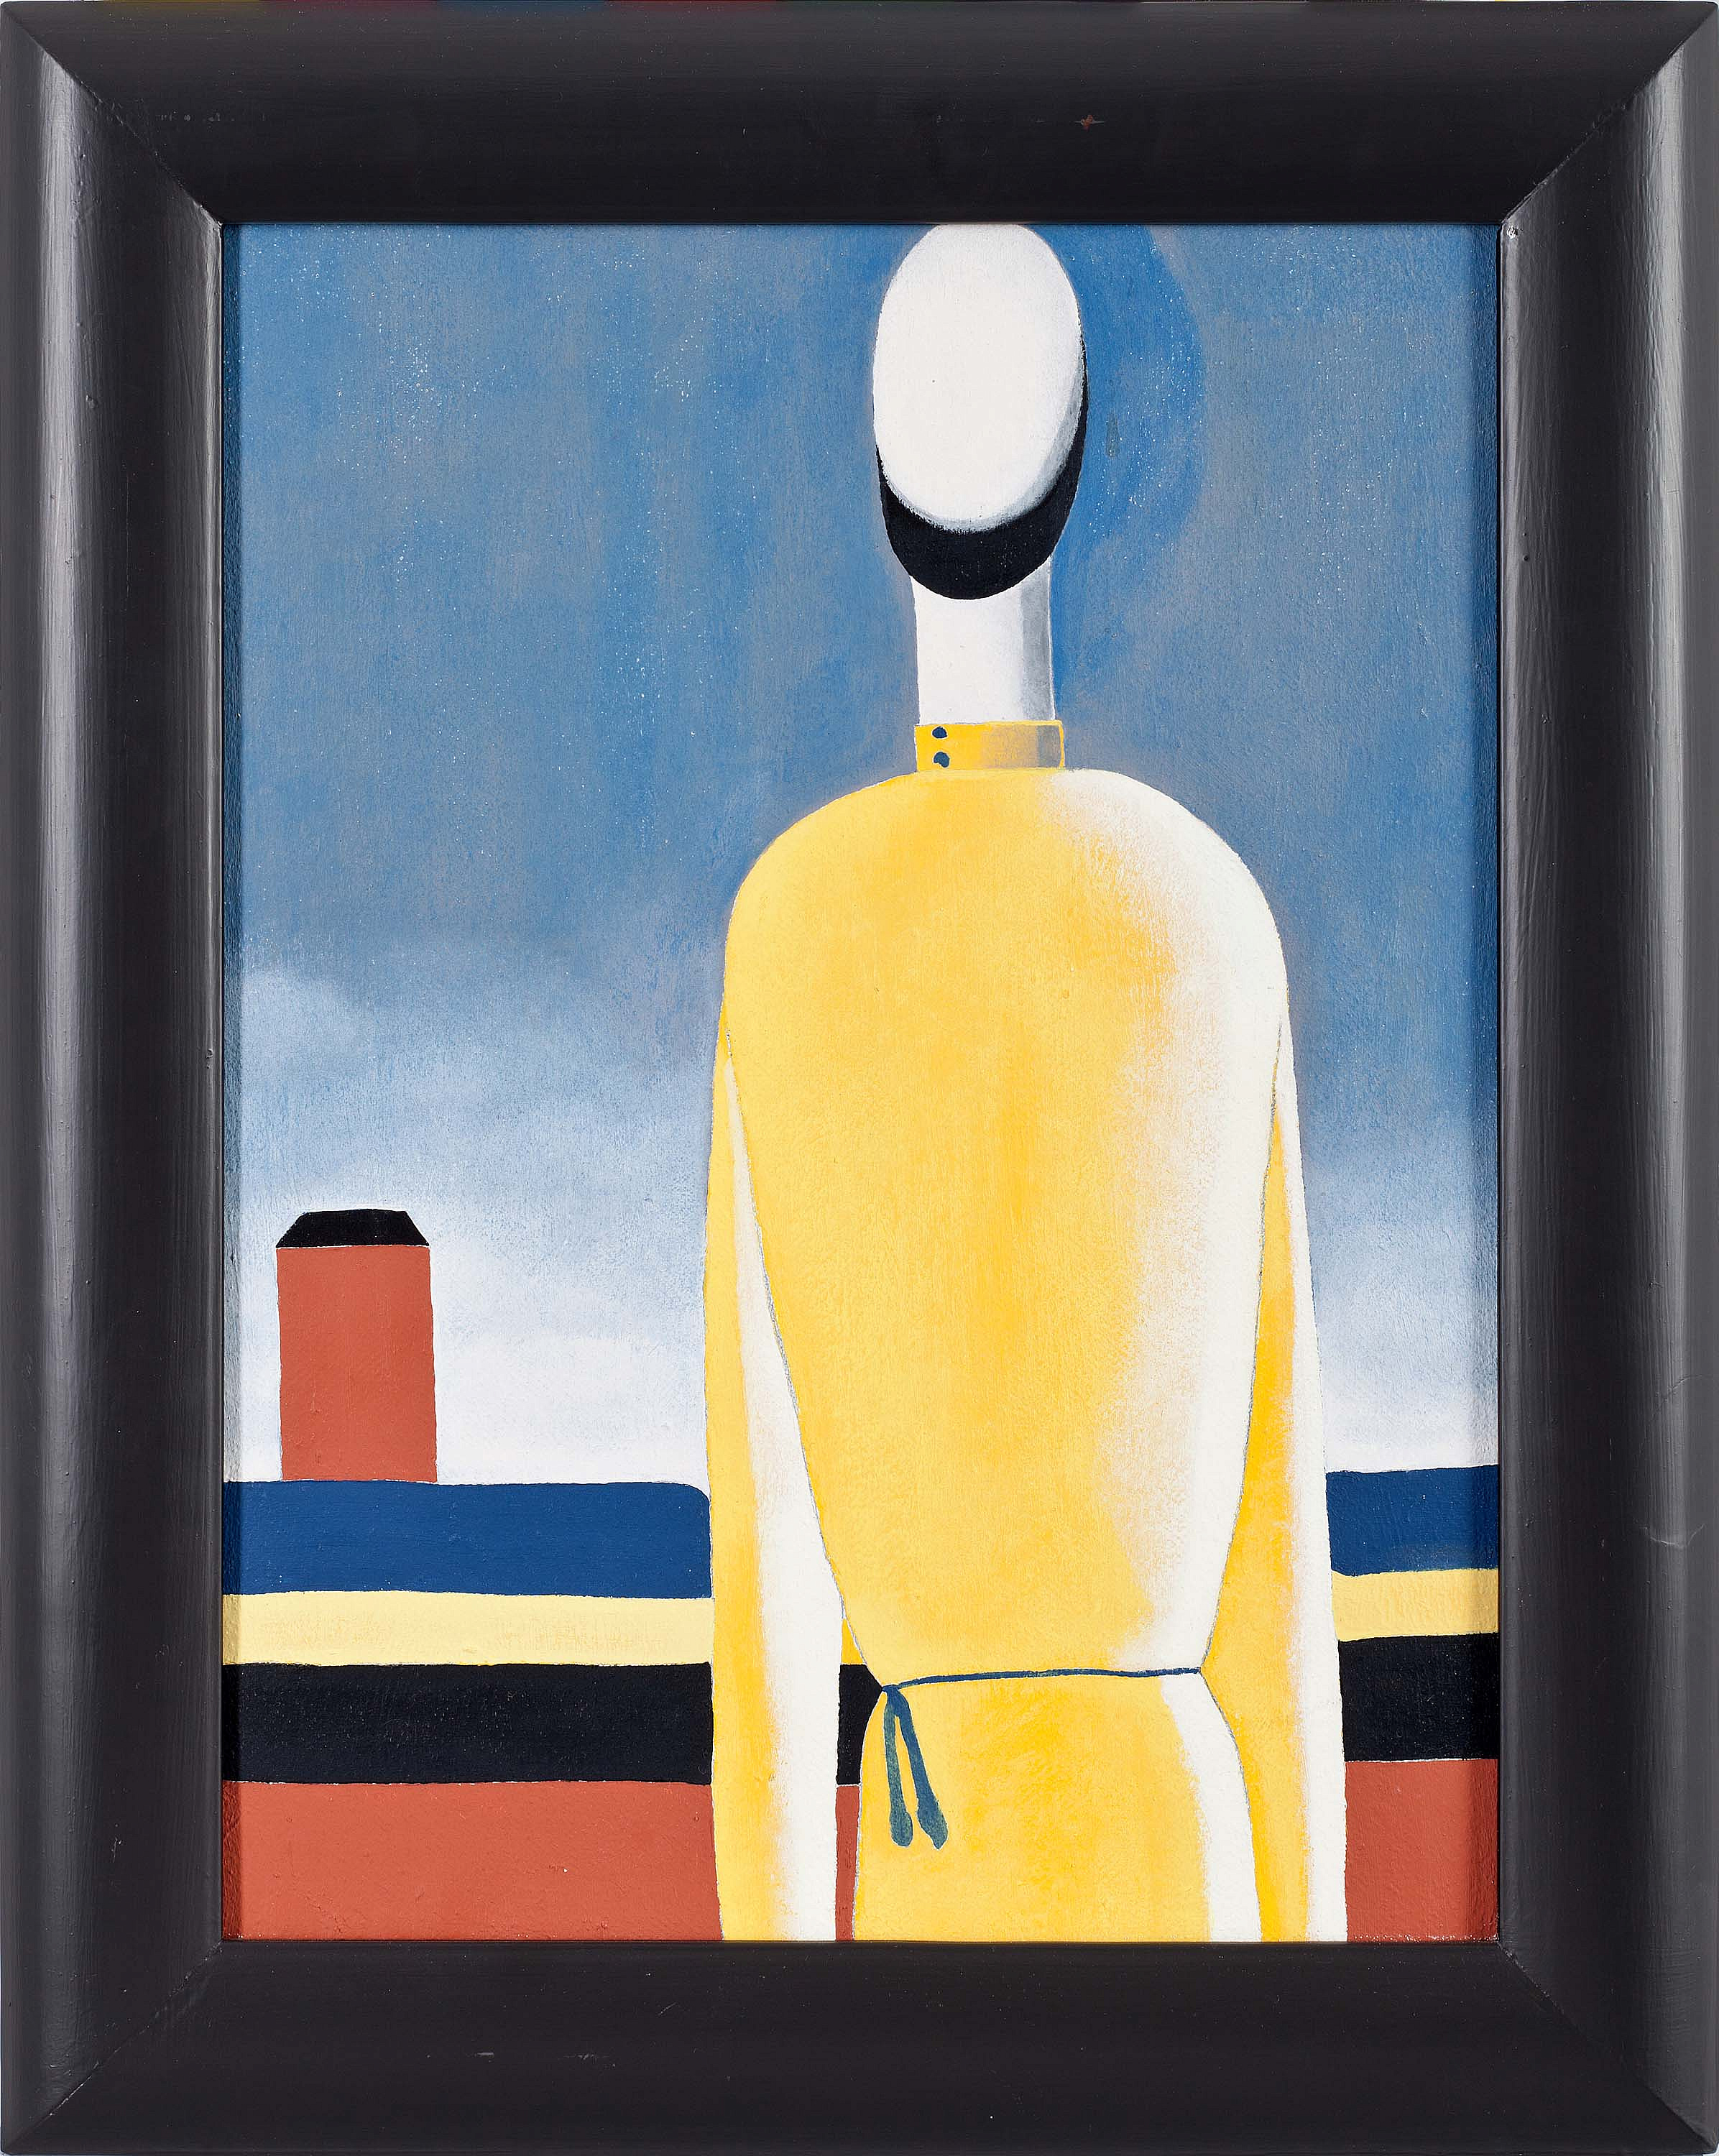 Сomplicated Feeling. Torso in the Yellow Shirt. Copy of K. Malevich's Picture